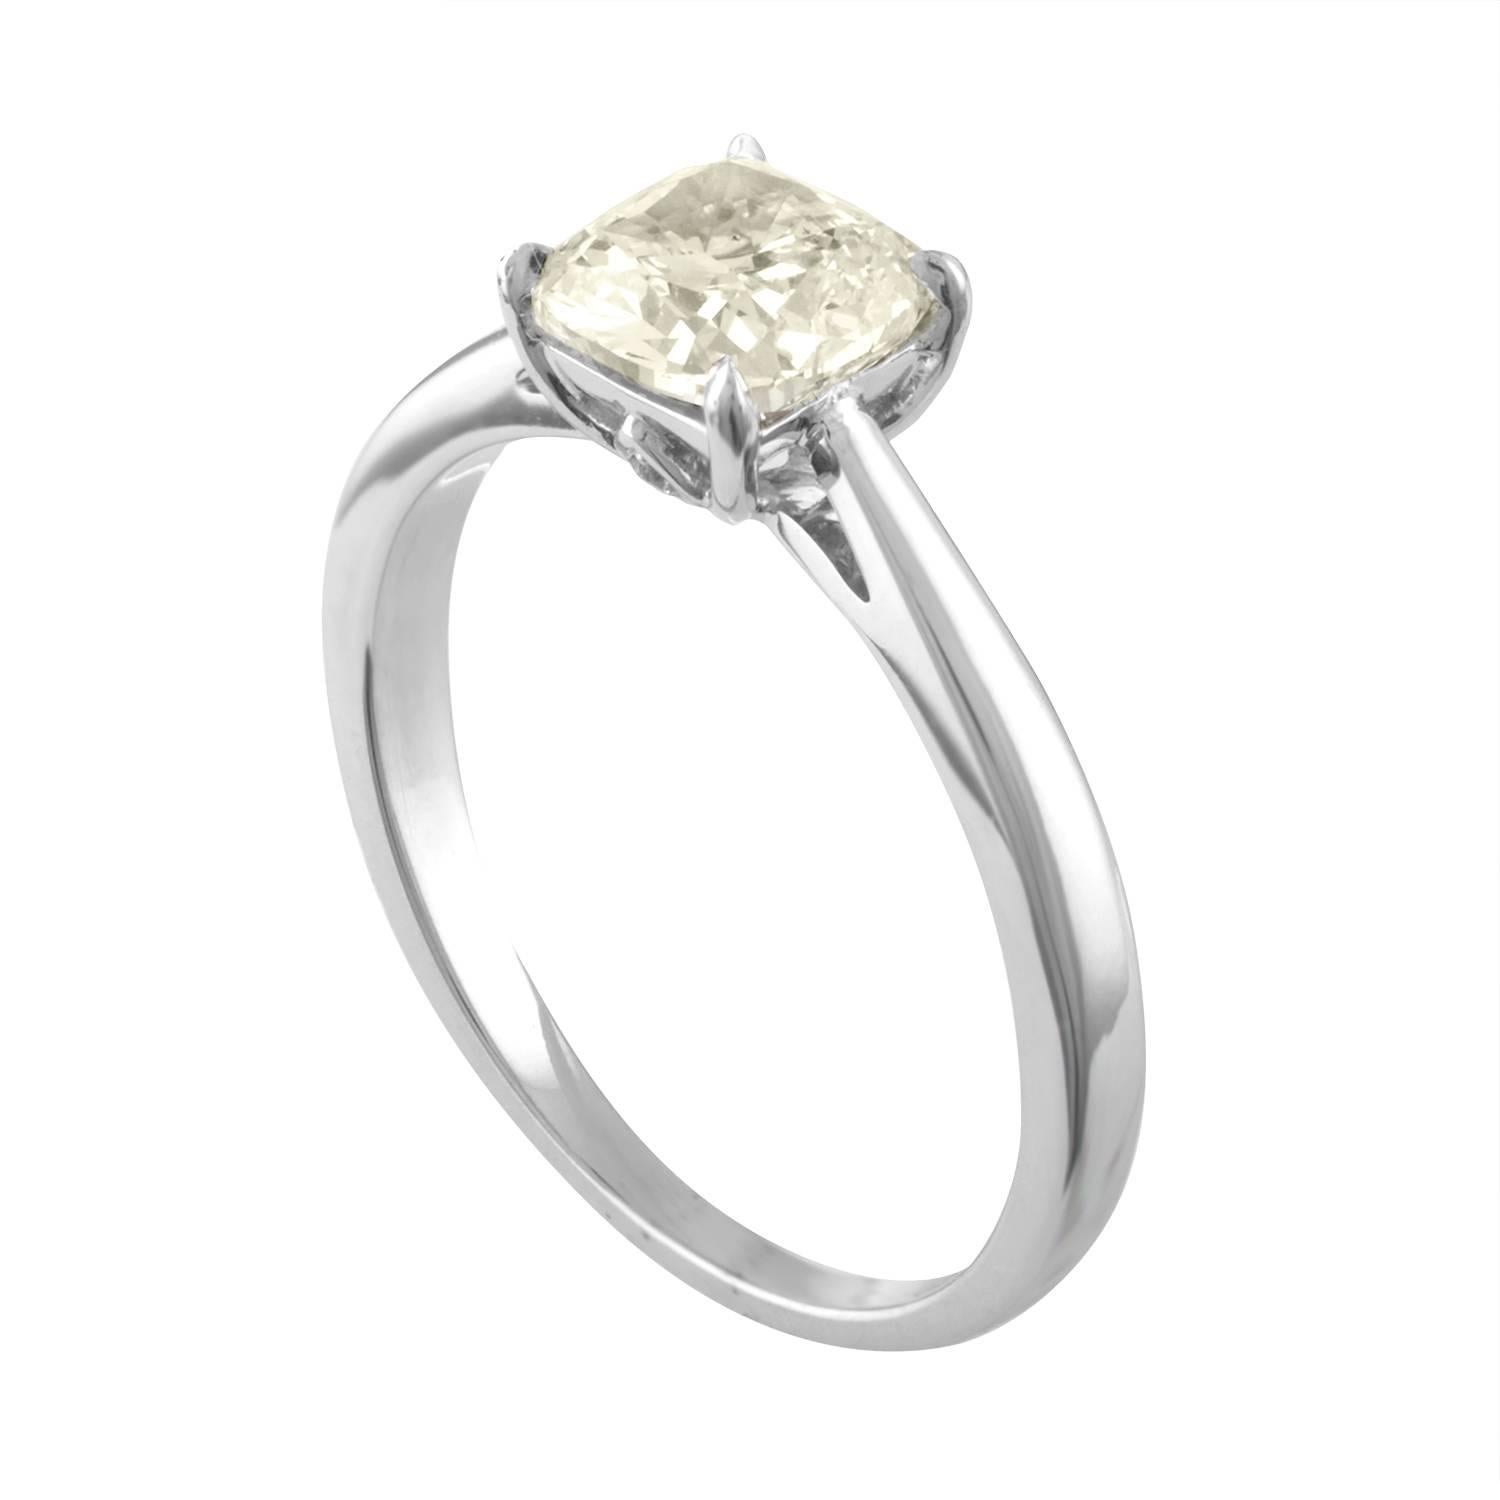 Solitaire Engagement Ring
The ring is 18K White Gold
The center is a Cushion Cut Stone 1.10 Carats K VS2
There are 2 small diamonds on the crown 0.02 Carats G VS
The ring is a size 6, sizable.
The ring weighs 2.6 grams
